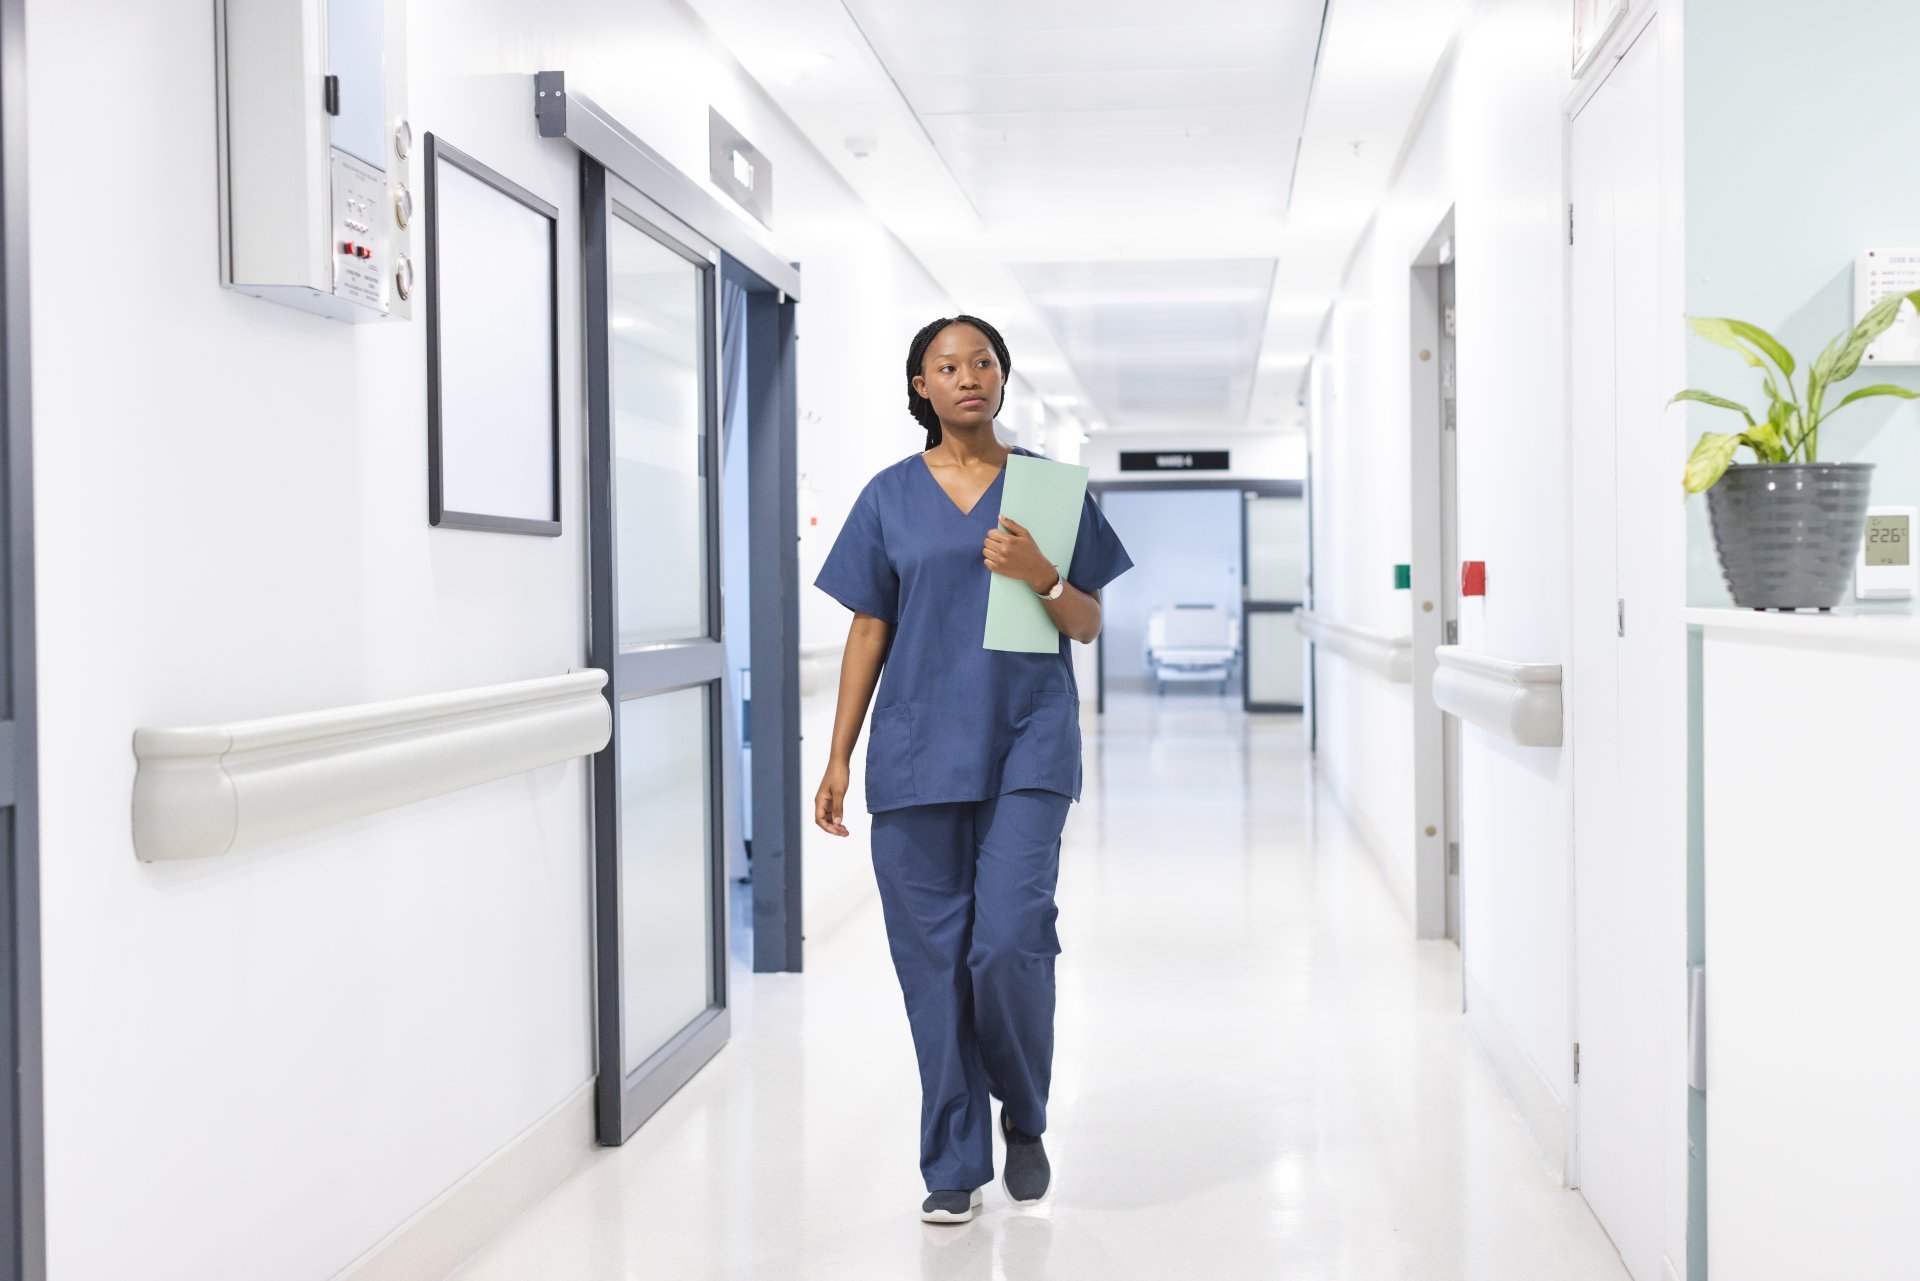 A young female healthcare worker walks down an empty hospital corridor holding documents.